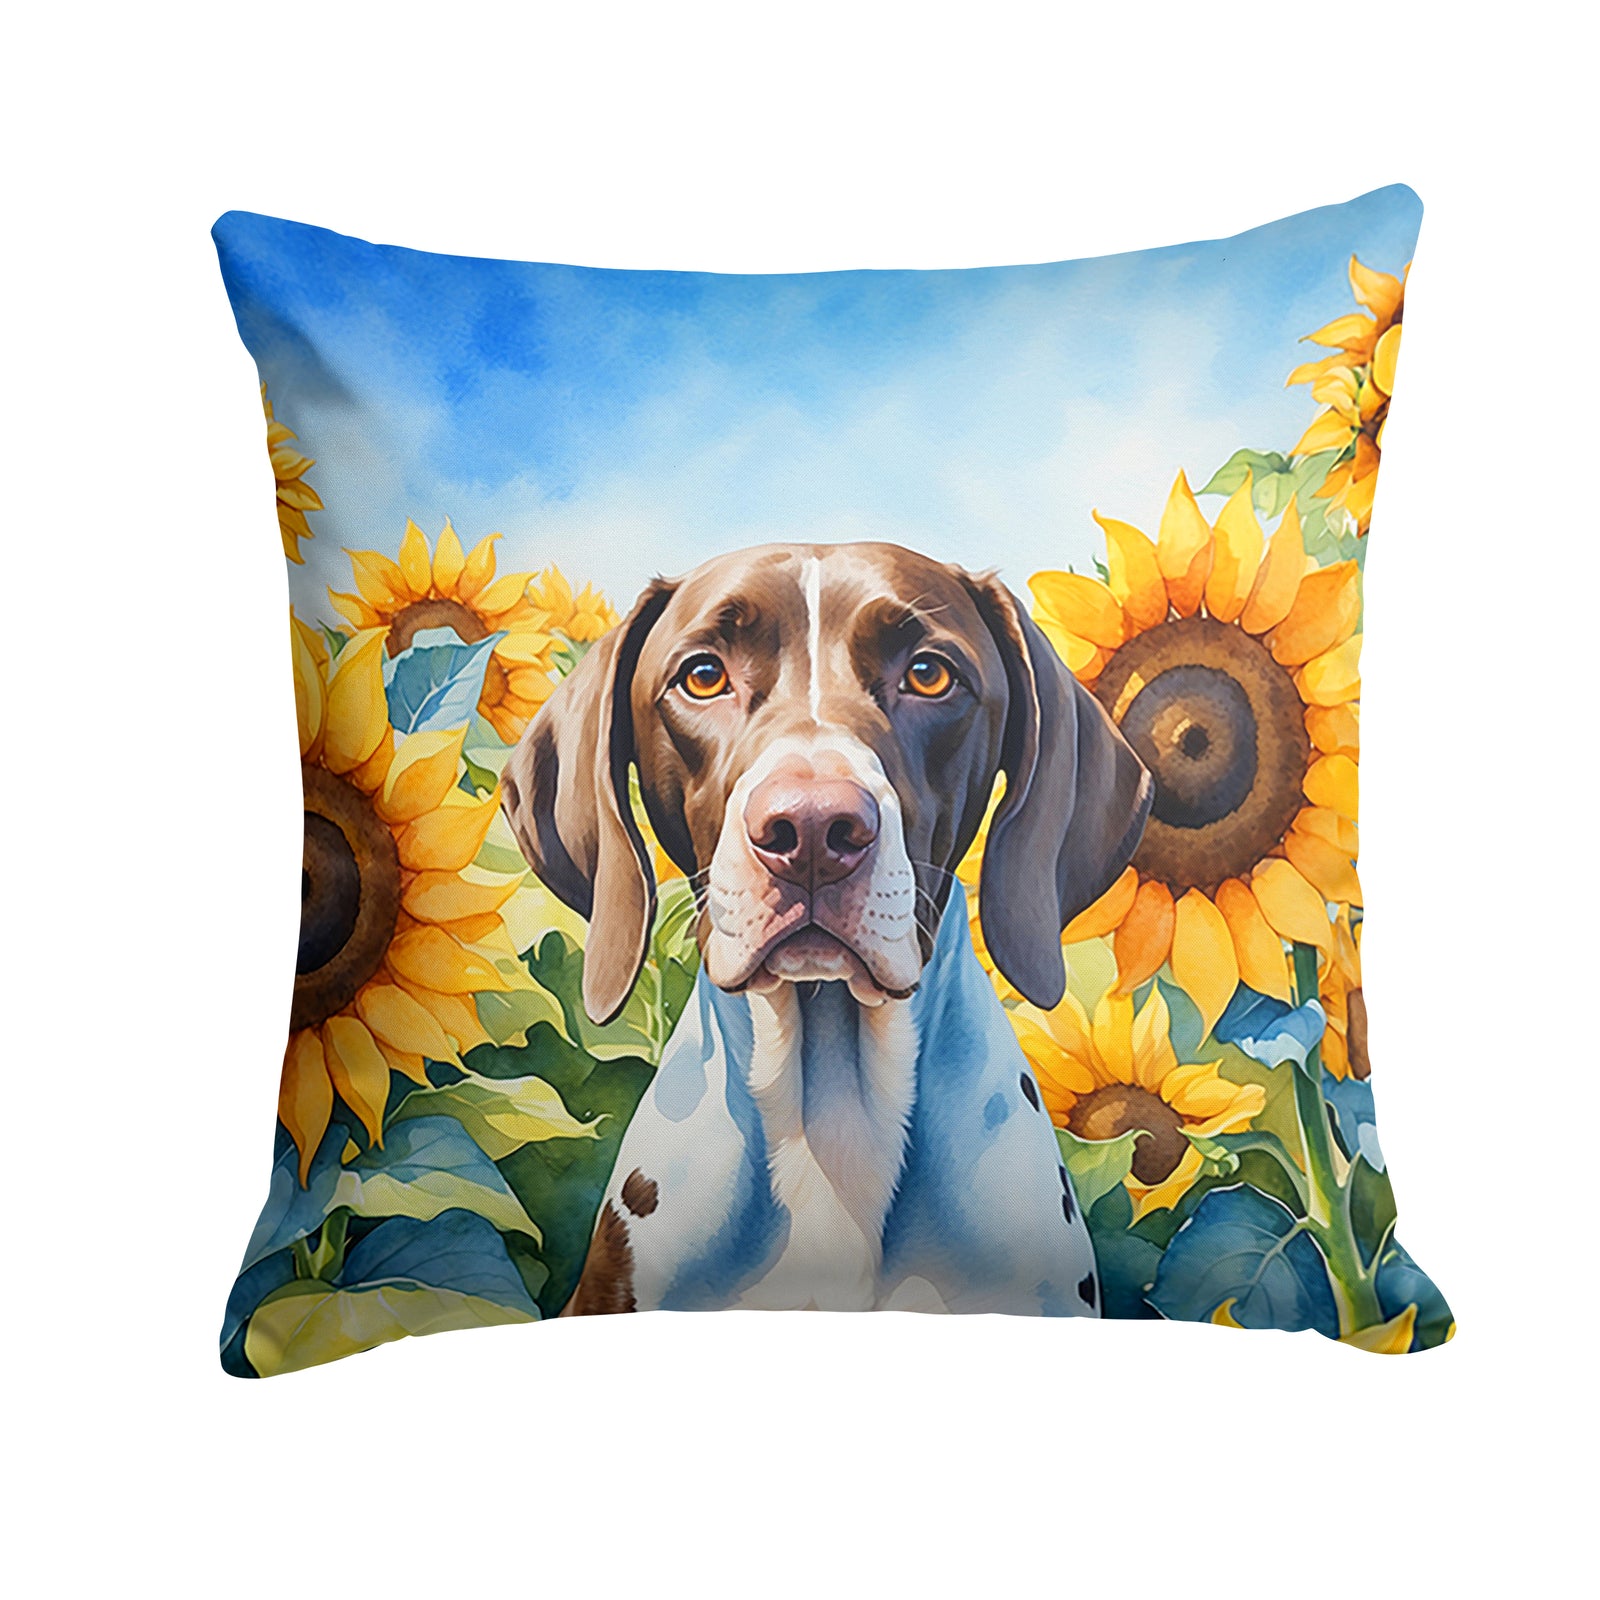 Buy this Pointer in Sunflowers Throw Pillow